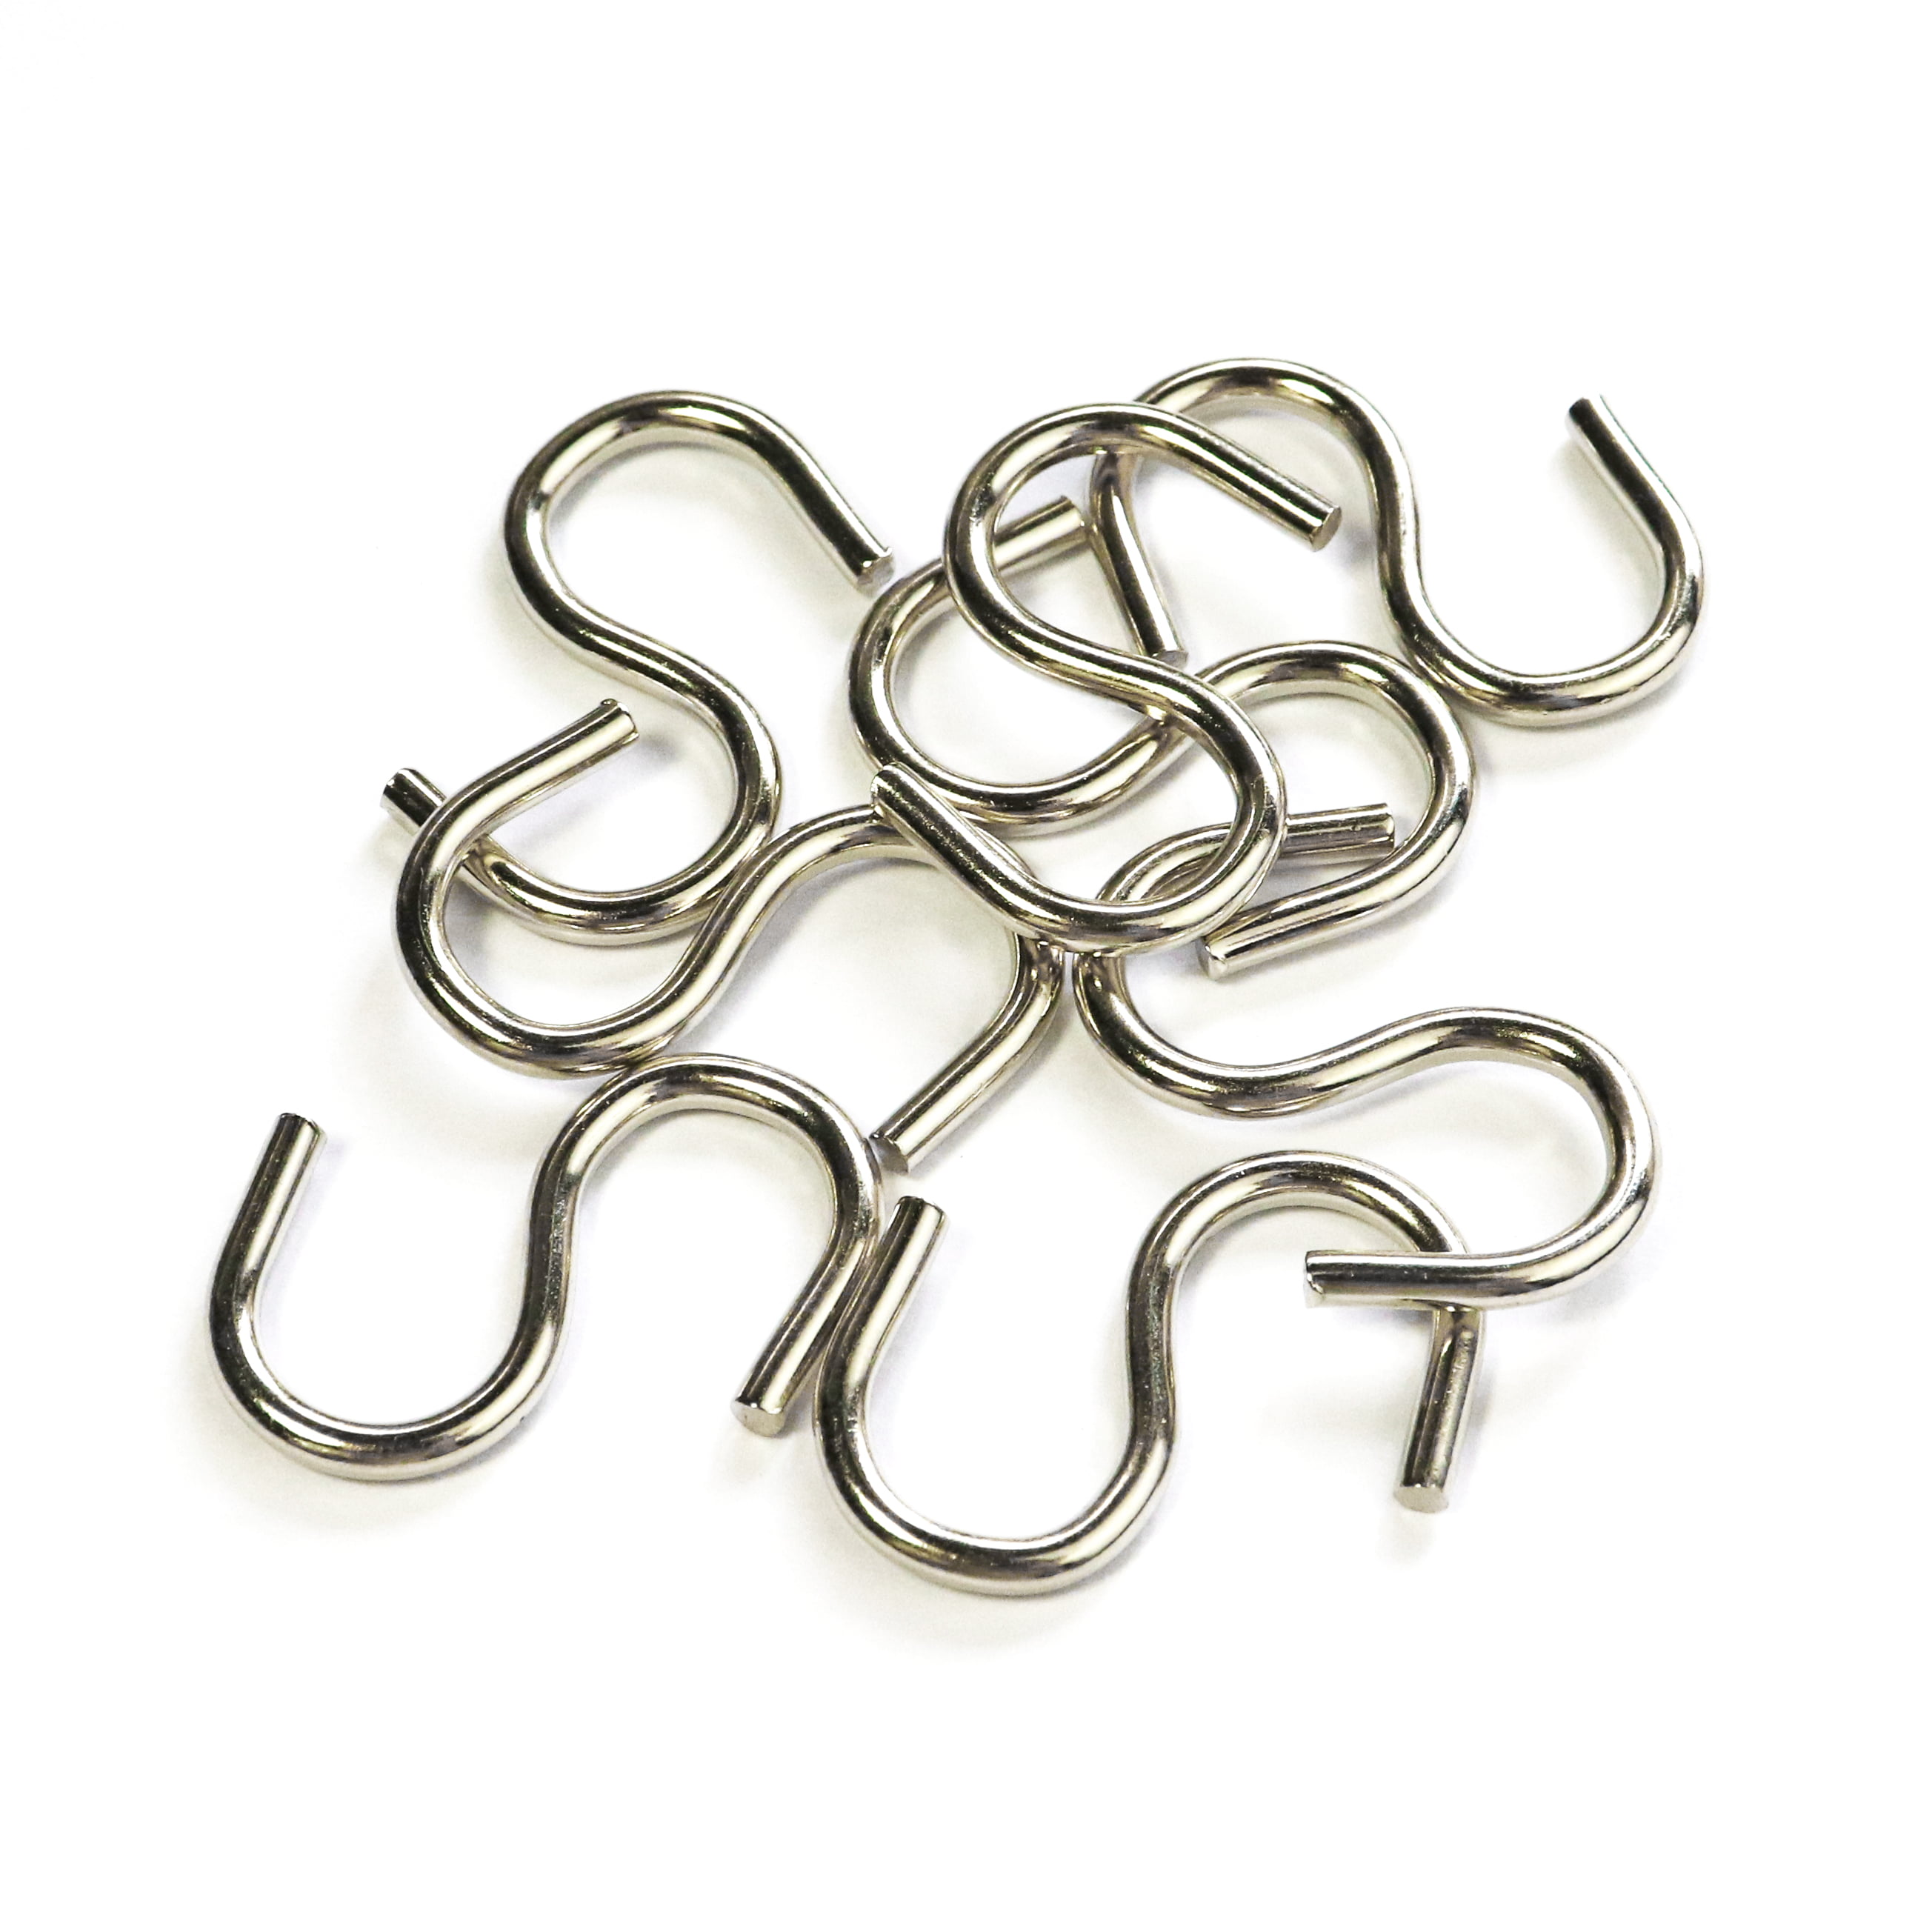 Mini S Hooks Connectors S Shaped Wire Hook Hangers 100pcs Hanging Hooks for  DIY Crafts, Hanging Jewelry, Key Chain, Tags, Fishing Lure, Net Equipment  (0.75 Inch) 